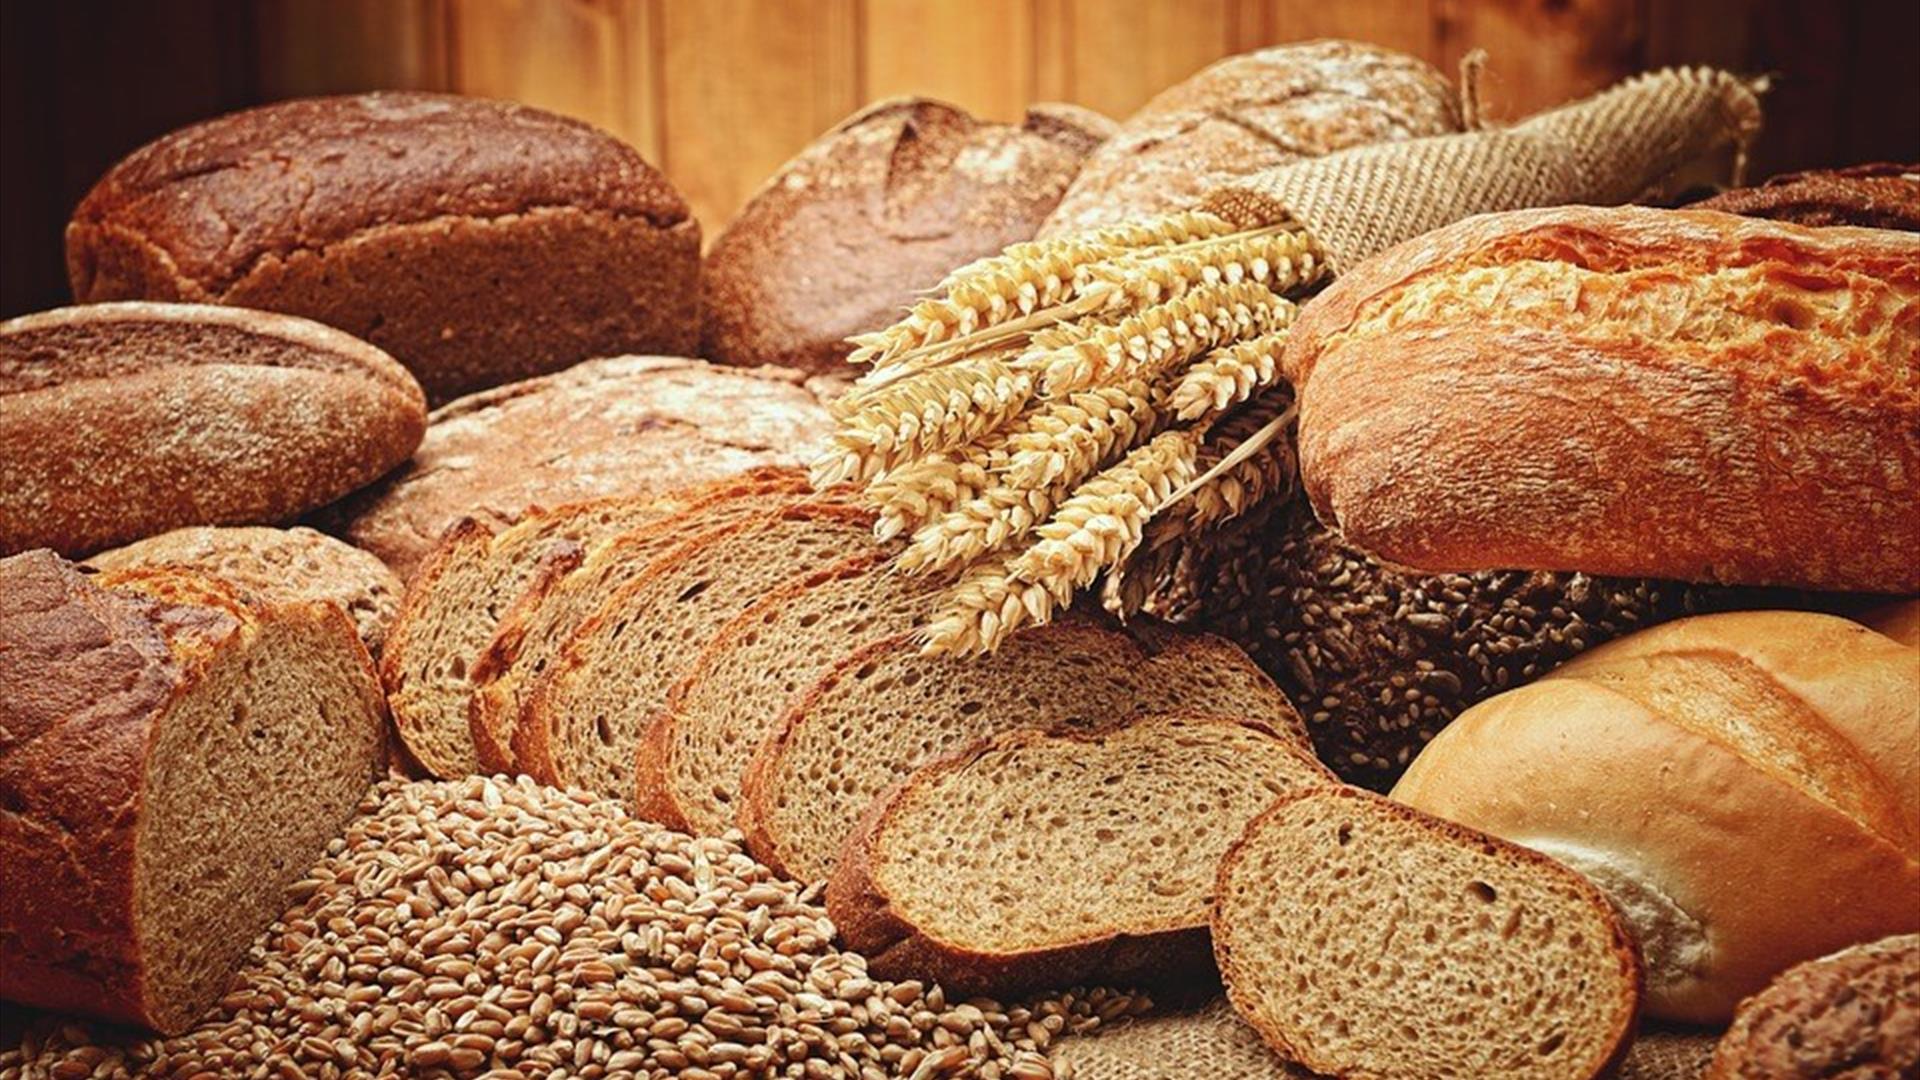 Image of various types of bread sold at Jeffer's Home  Bakery cafe